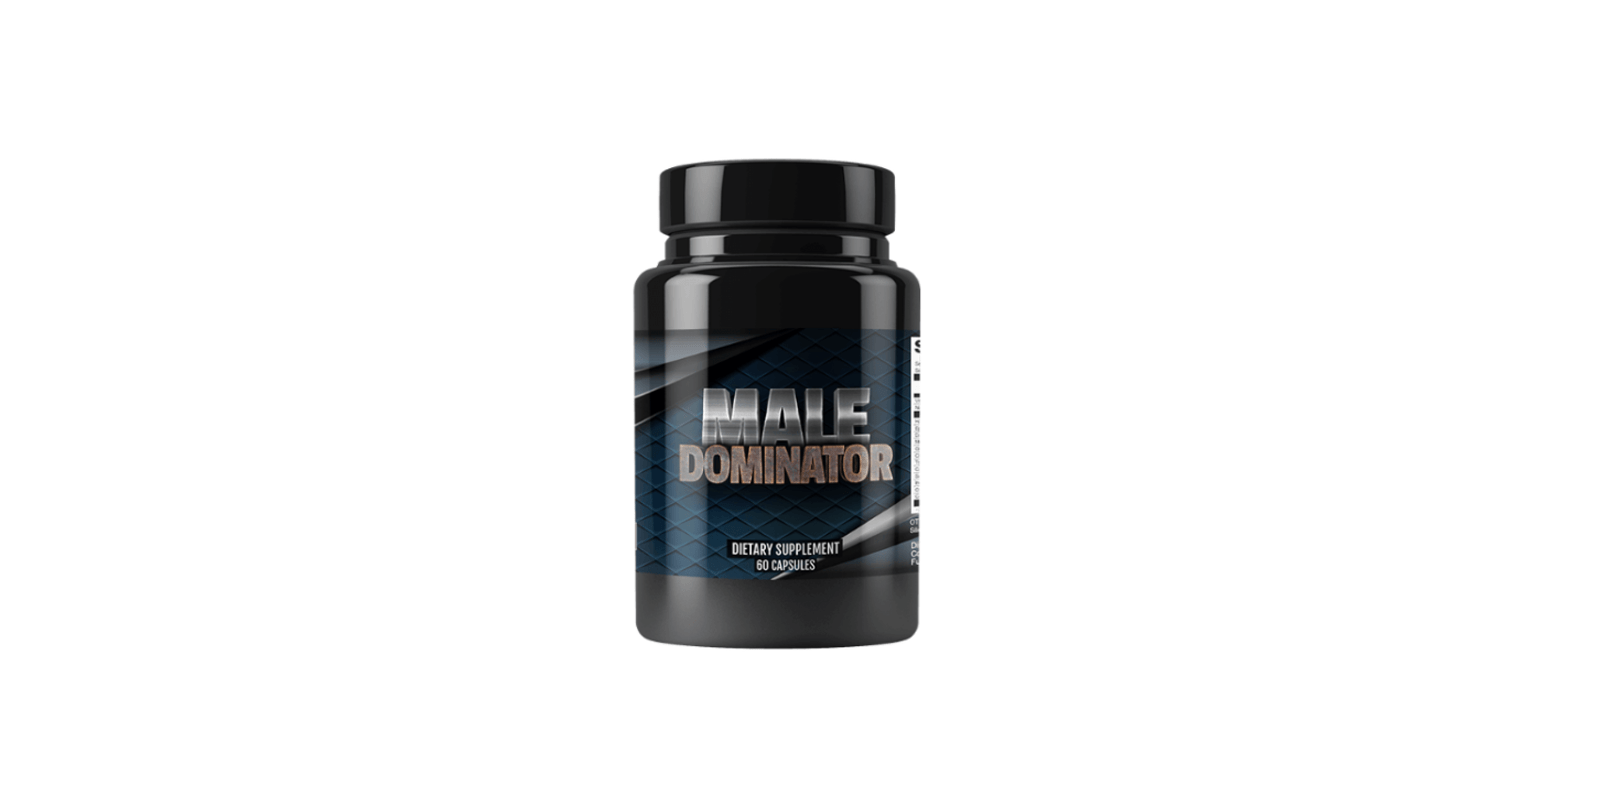 Male-Dominator-review